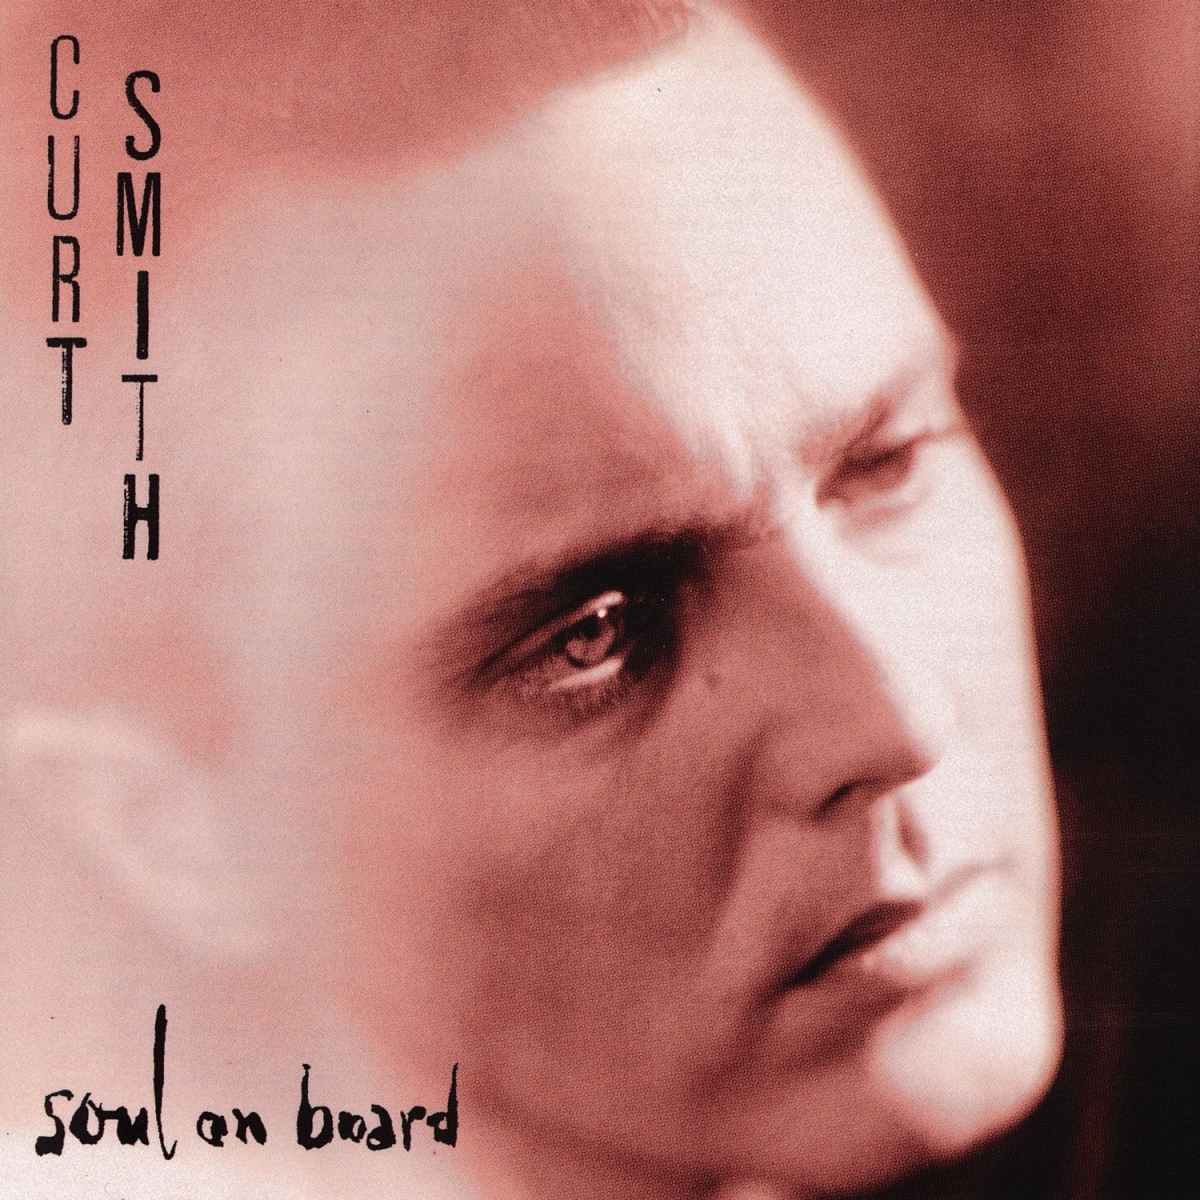 <p>In 1993, <a href="https://www.allmusic.com/artist/curt-smith-mn0000785955/biography" class="CMY_Link CMY_Redirect CMY_Valid">Smith released his first of two solo albums</a>, <em>Soul on Board</em>, and then formed the alt pop/rock band <a href="https://www.allmusic.com/artist/mayfield-mn0000399053/discography" class="CMY_Link CMY_Redirect CMY_Valid">Mayfield</a> in 1995. They released their only album in 1998. Smith married girlfriend Frances Pennington and the couple had a daughter, Pennington Diva Smith. His second solo album, <em>Aeroplane</em>, was released in 2000 and featured new versions of Tears For Fears hits “Everybody Wants to Rule the World” and “Pale Shelter.”</p>